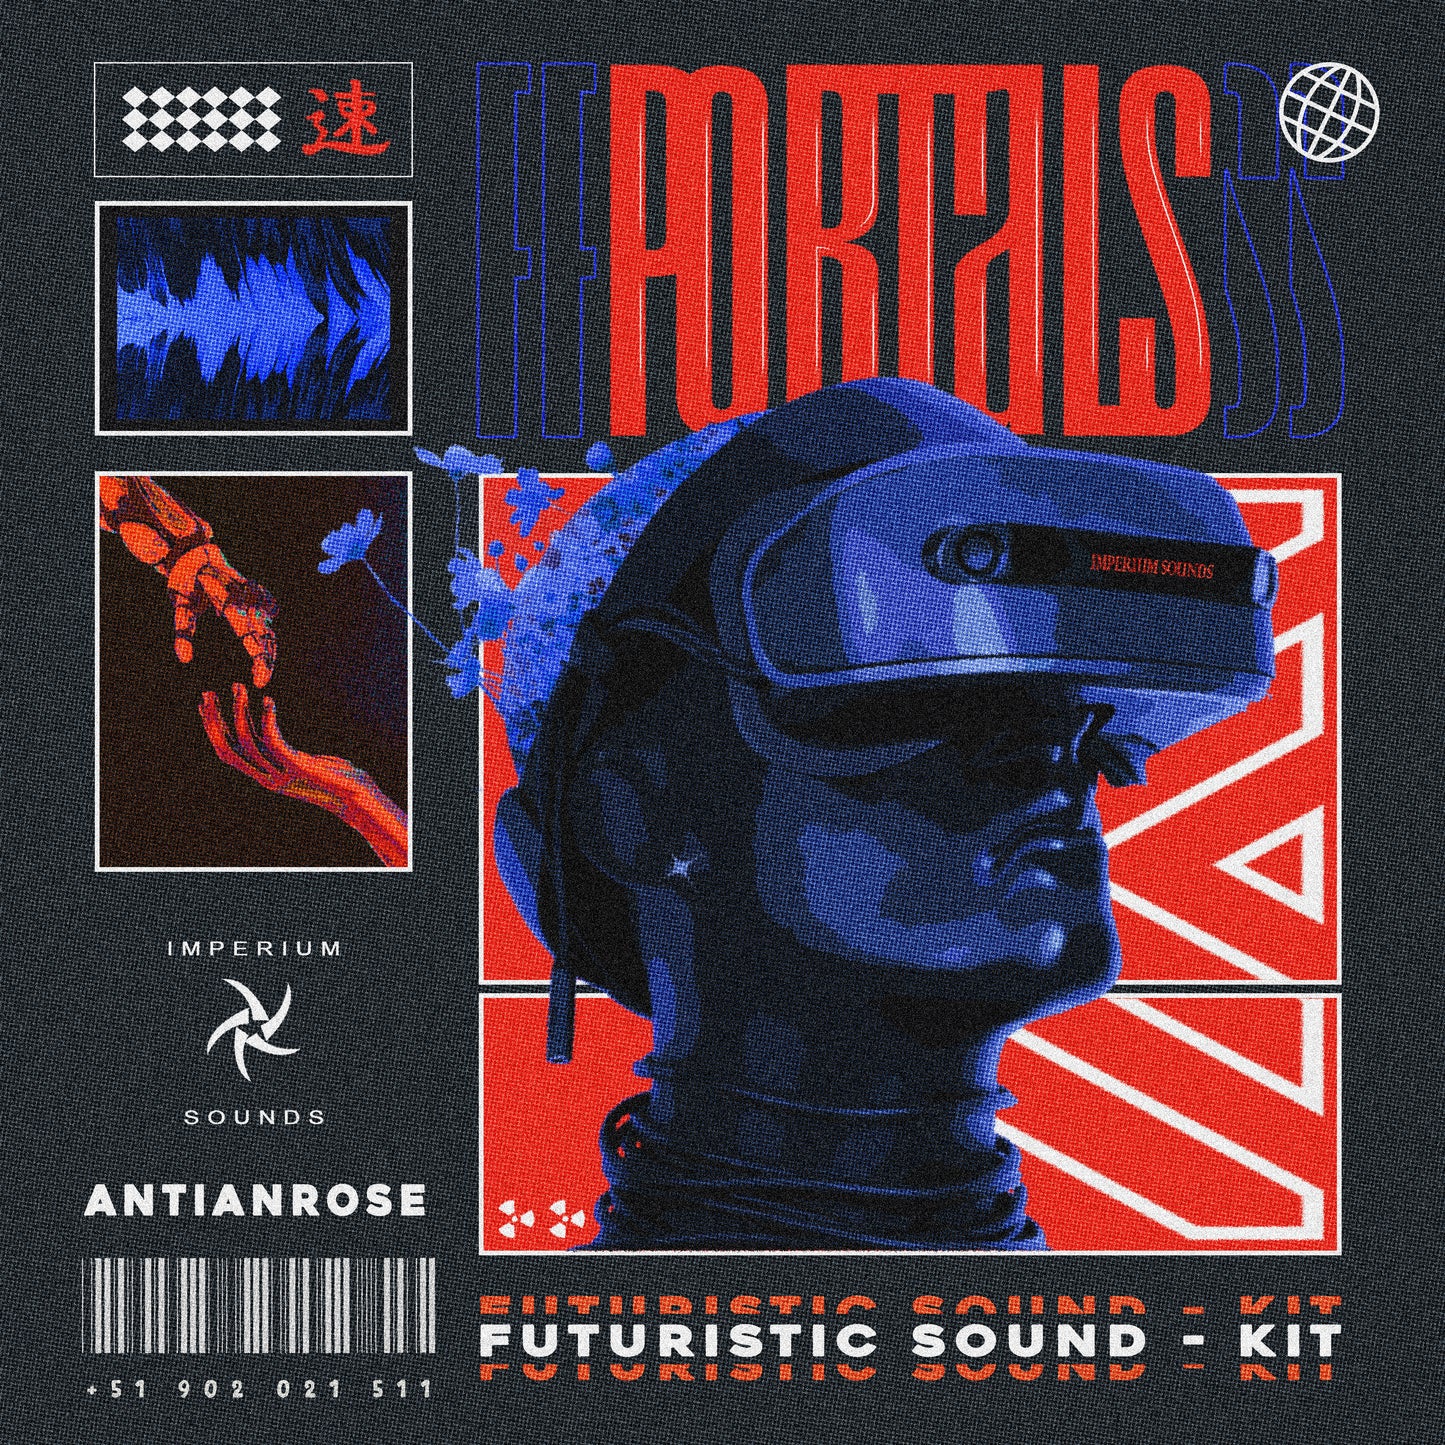 Portals - Sound-Kit by @antianrose